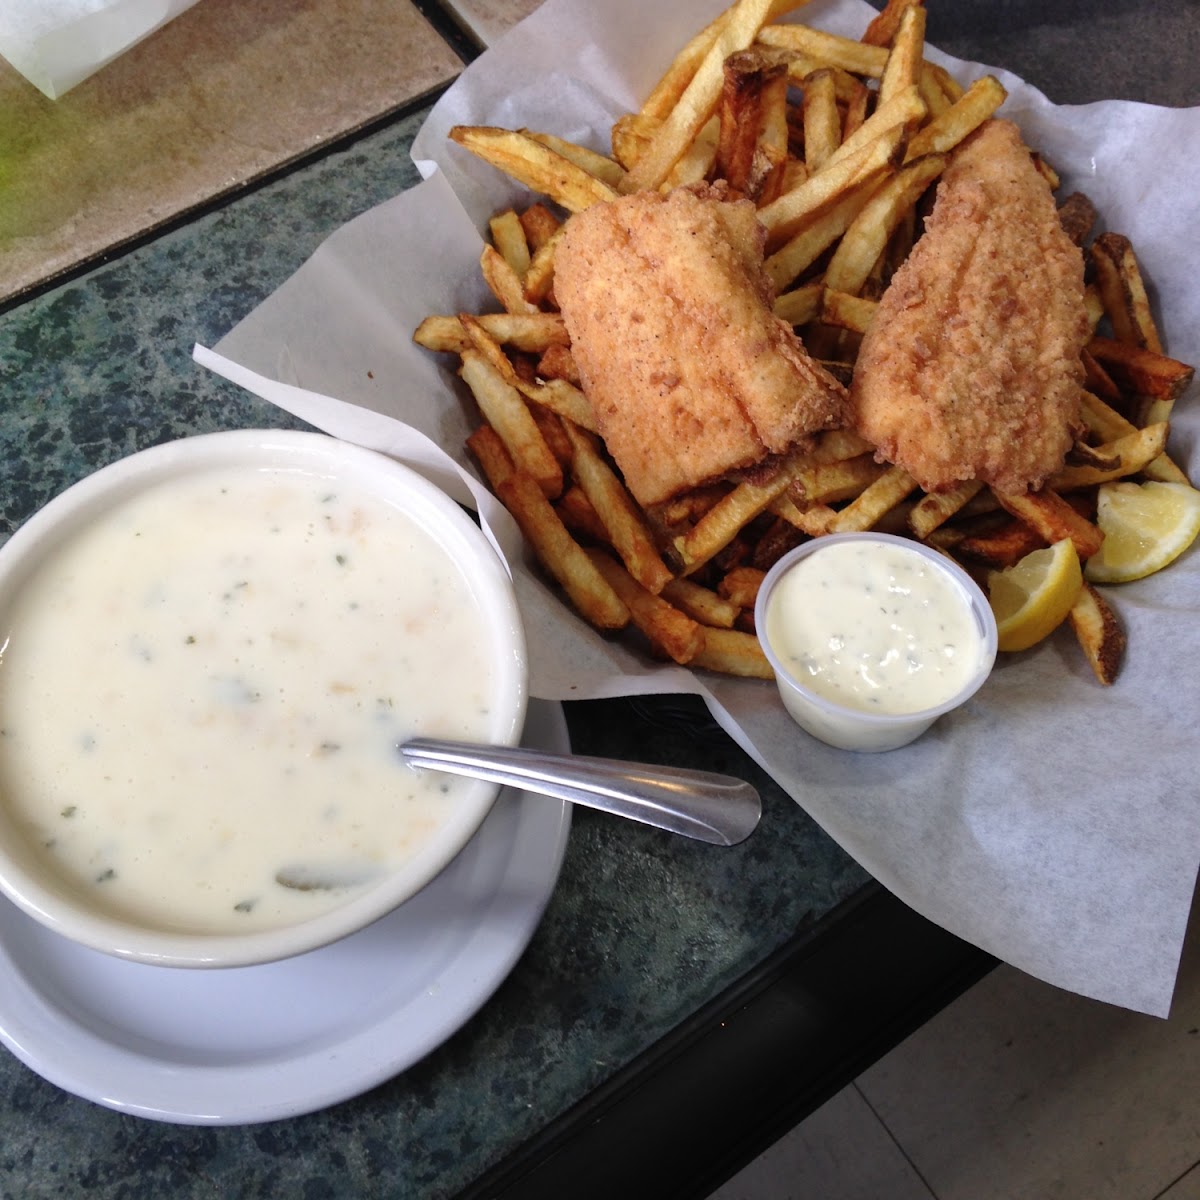 Gluten free clam chowder, cod fish and chips-delicious!!!